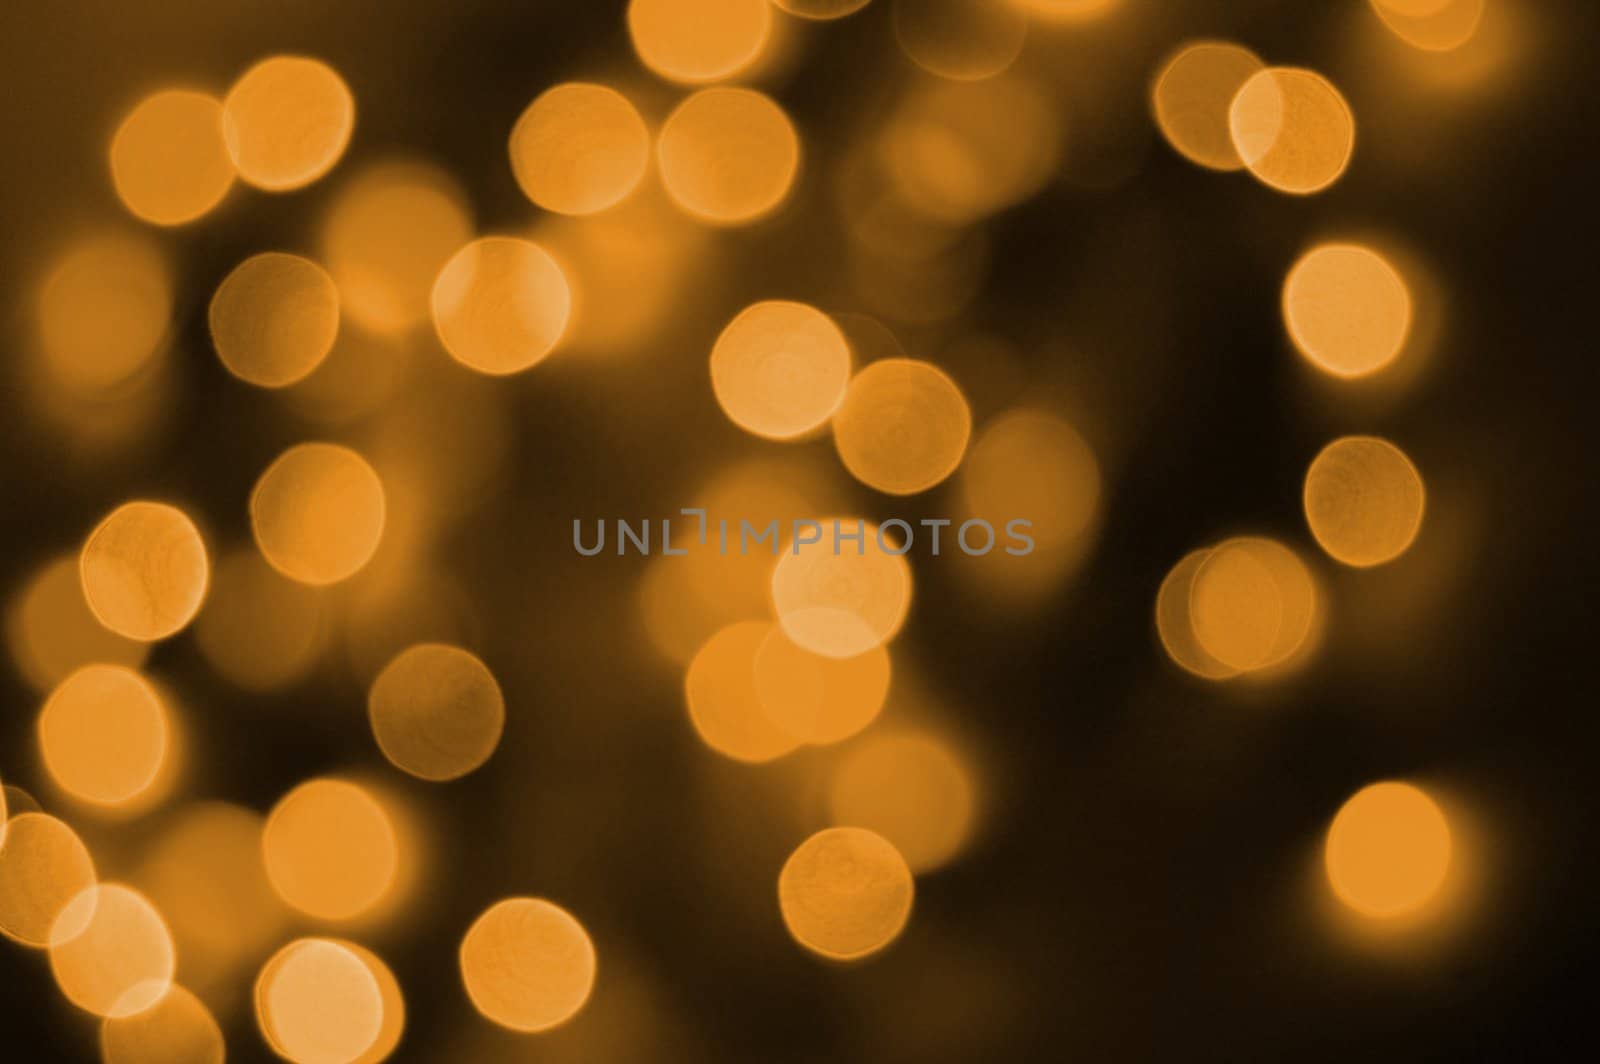 colorful orange abstract holiday lights background